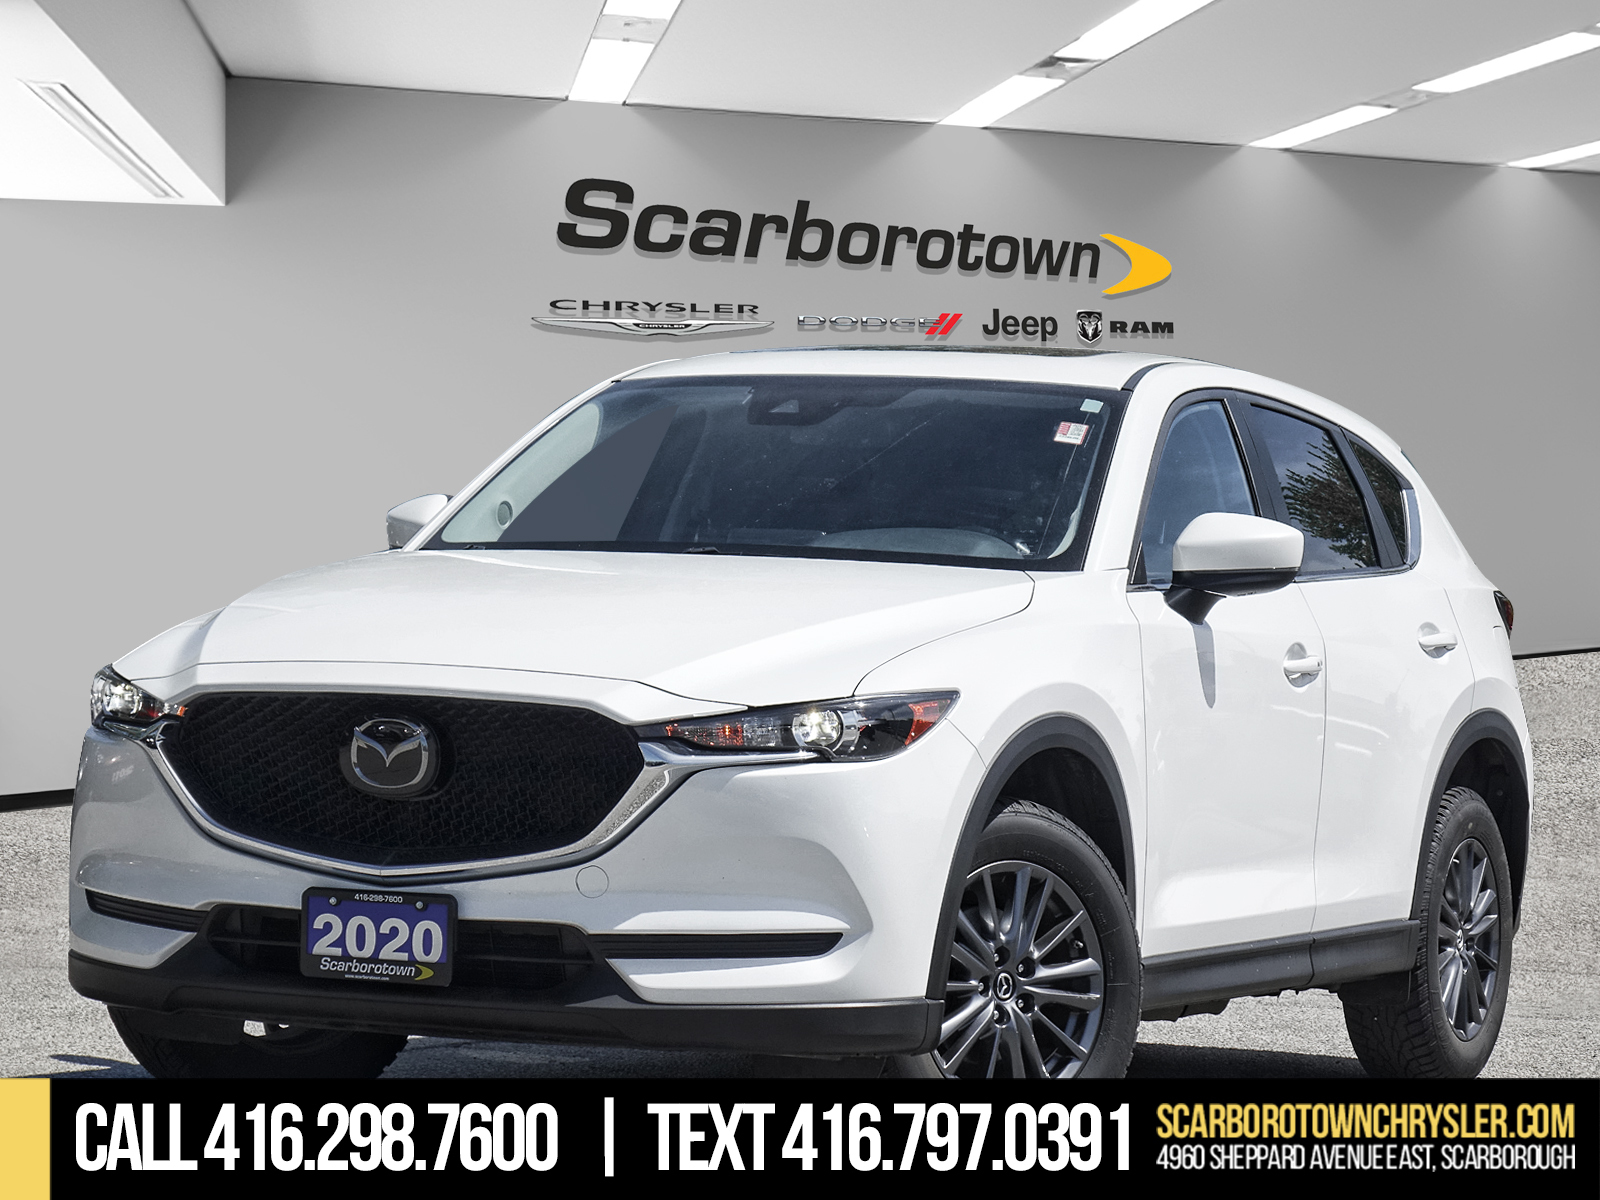 2020 Mazda CX-5 GS Auto AWD | Equipped like GT model!